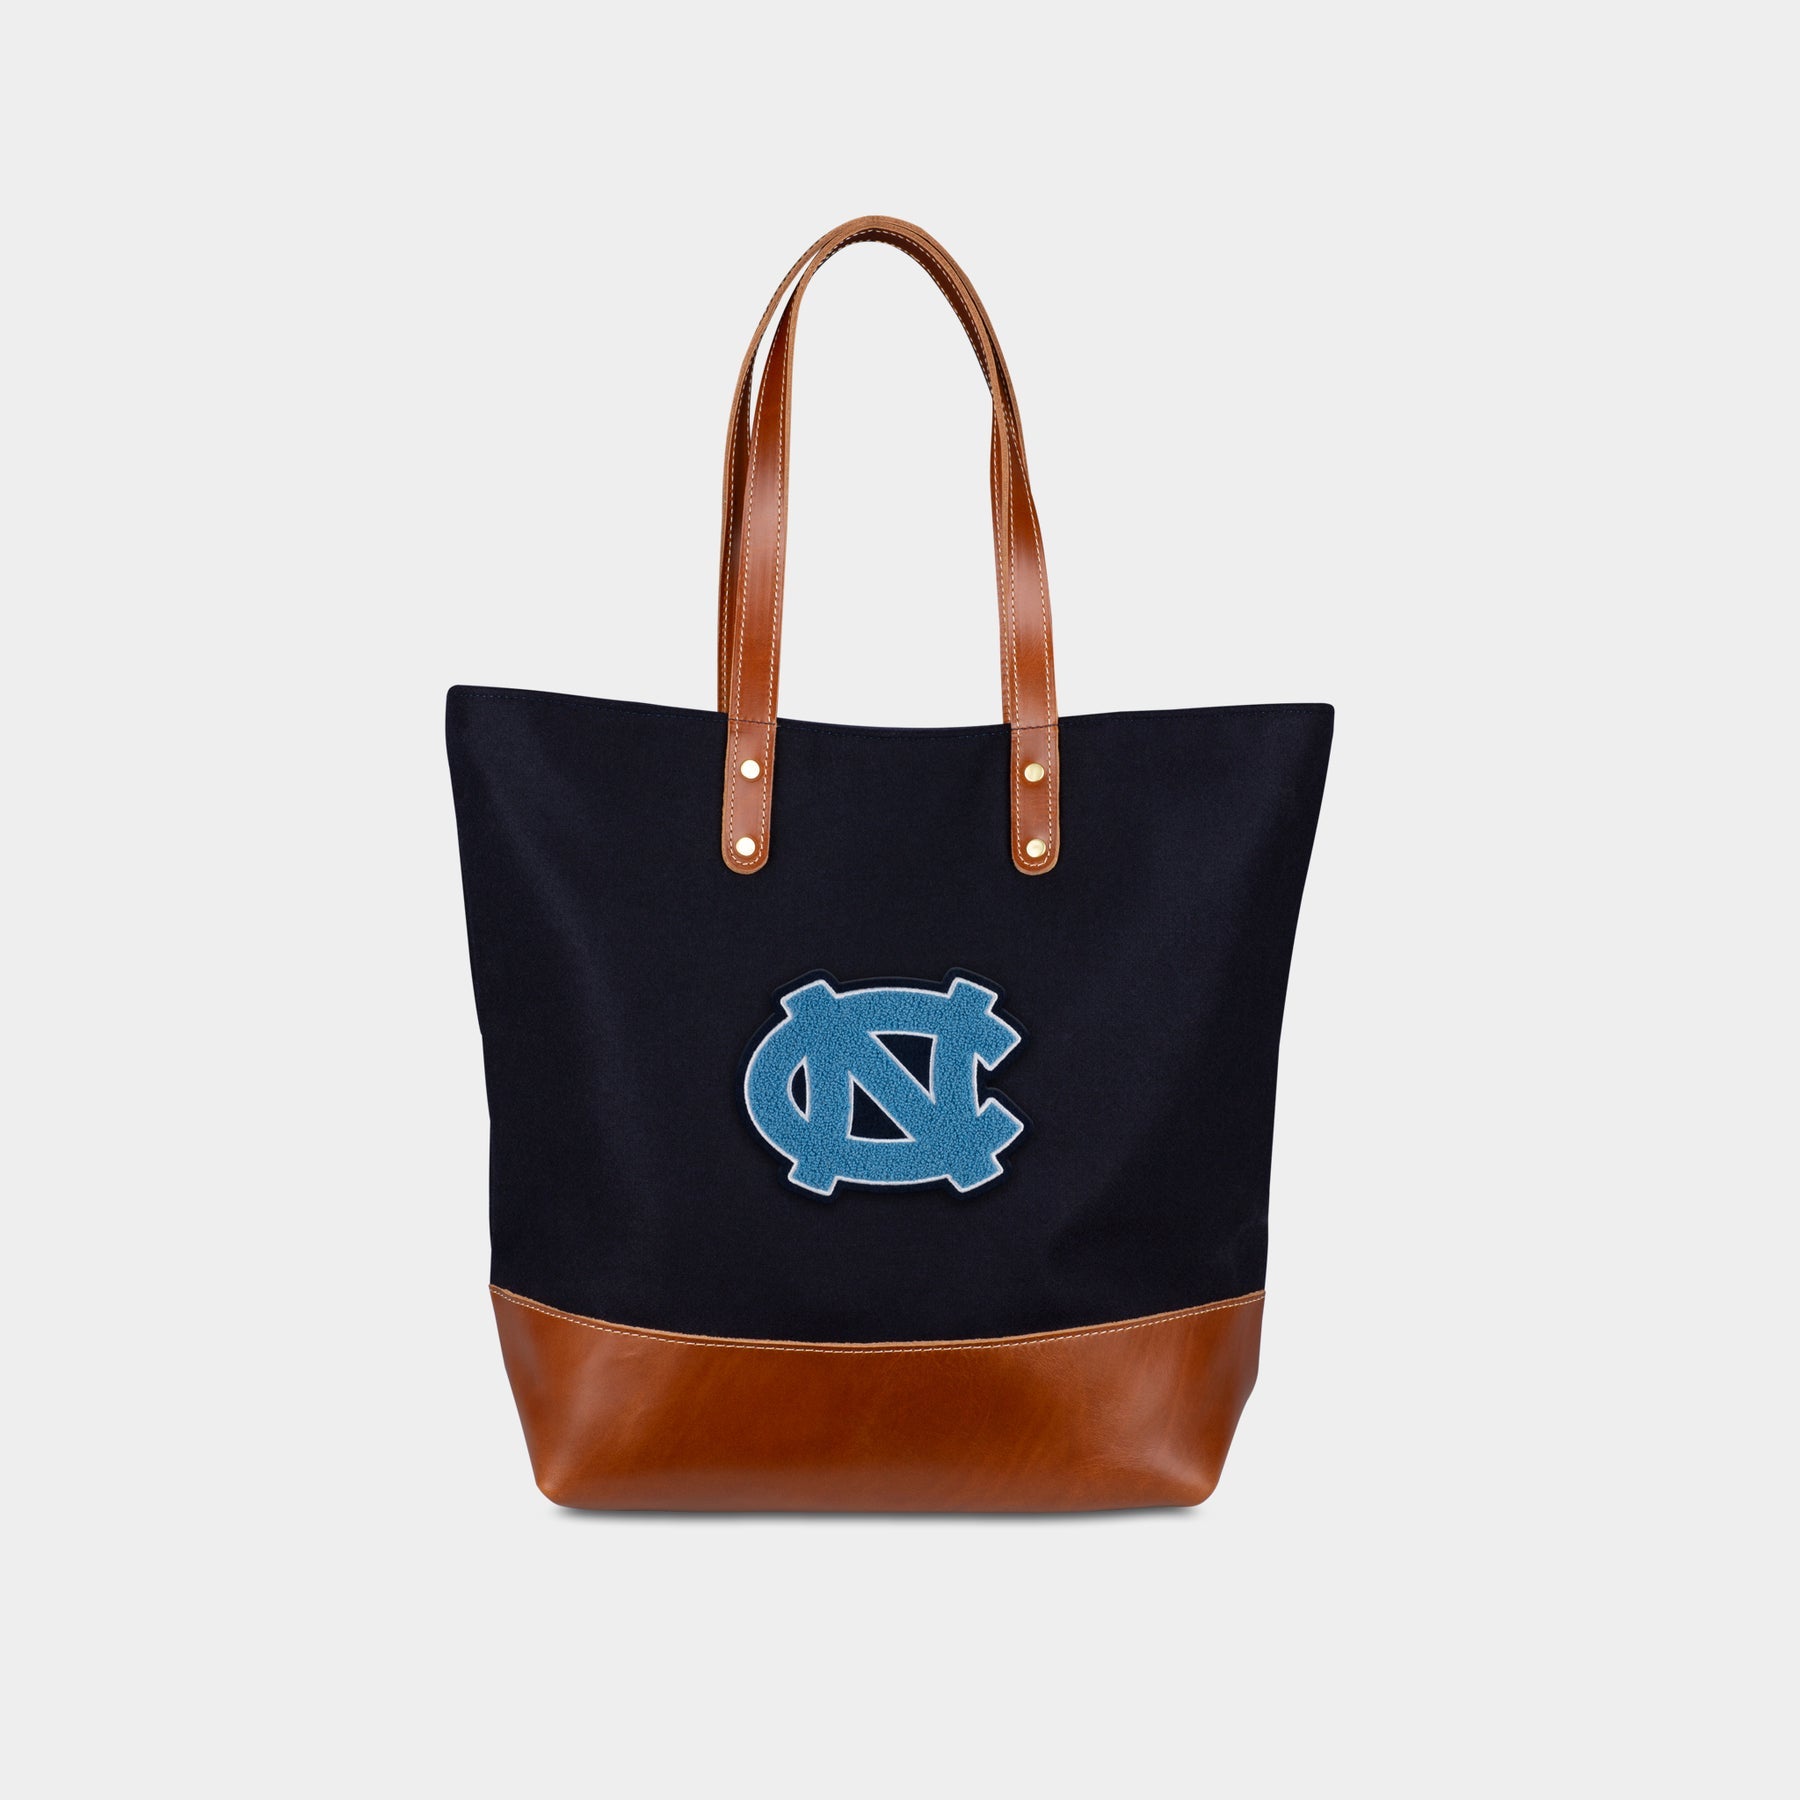 UNC "NC" Tote in Navy